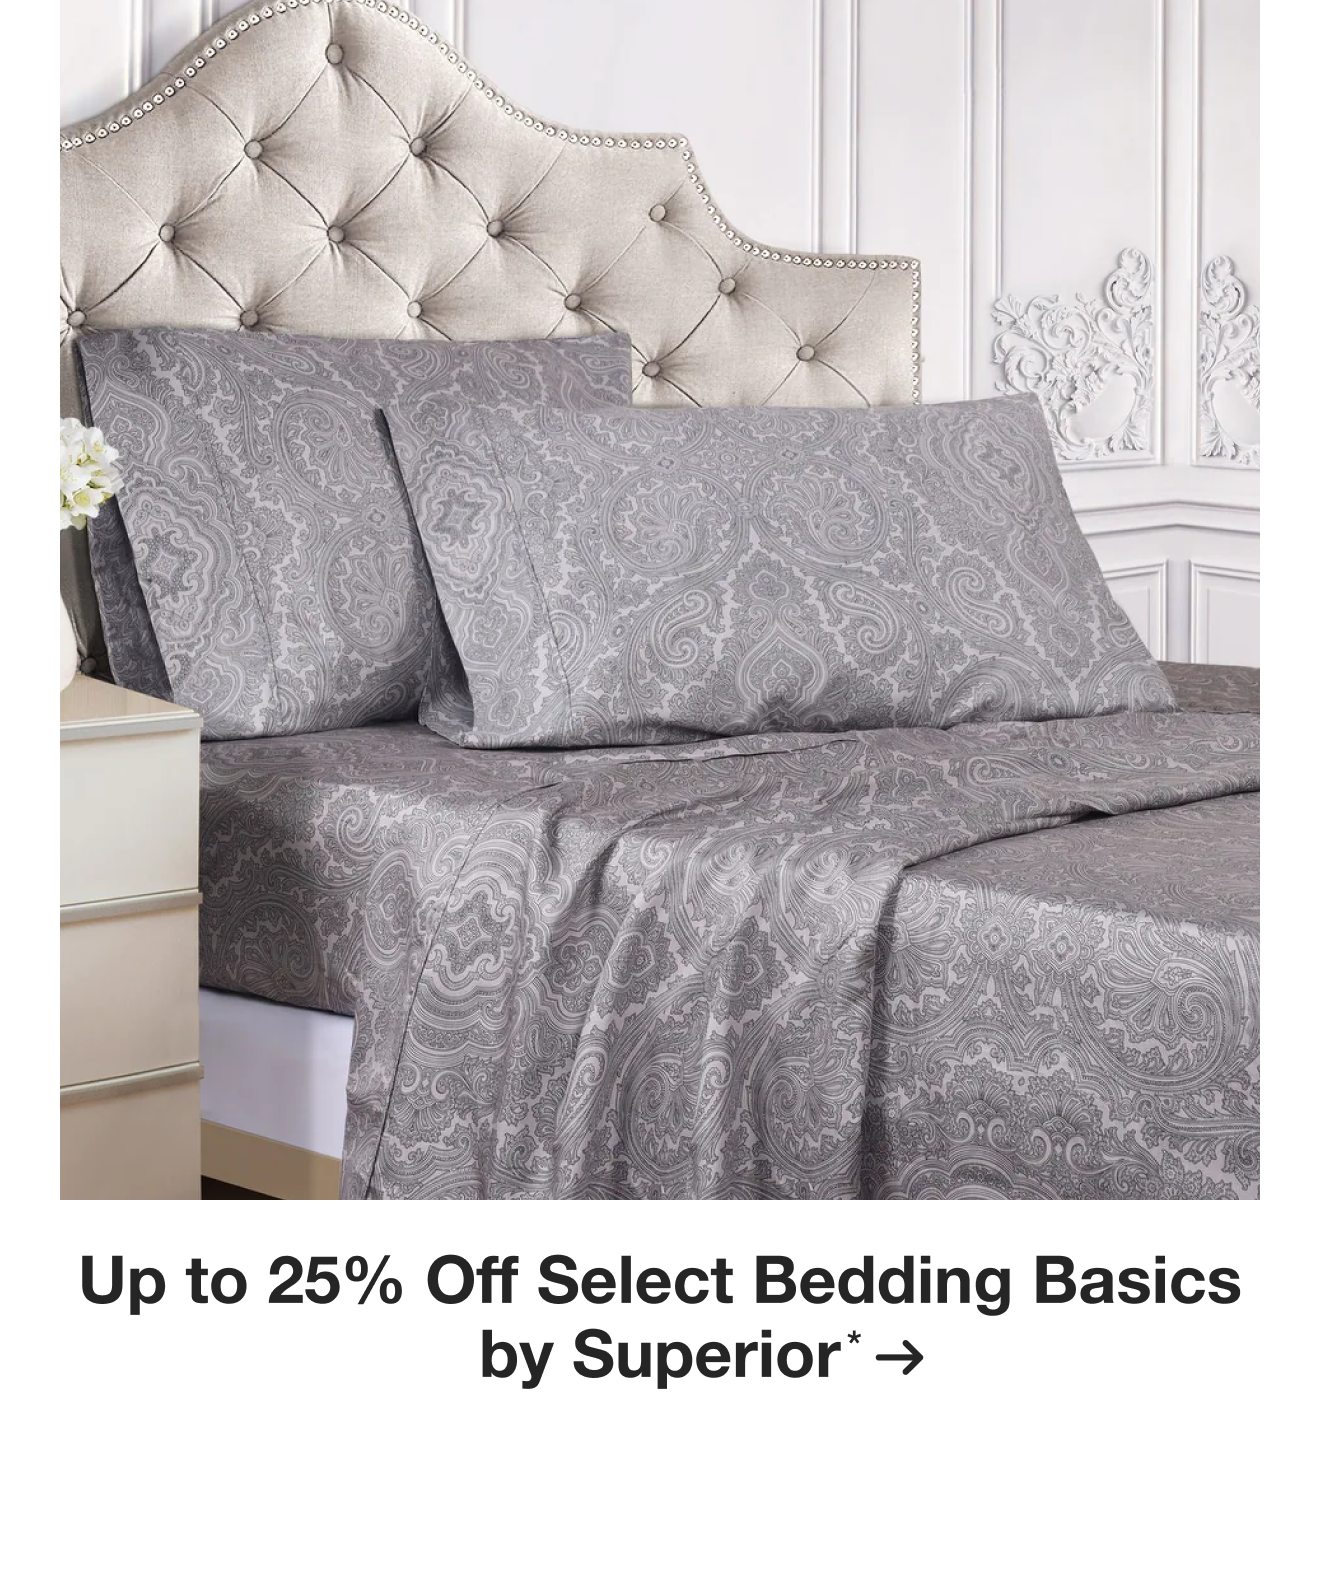 Up to 25% Off Select Bedding Basics by Superior*